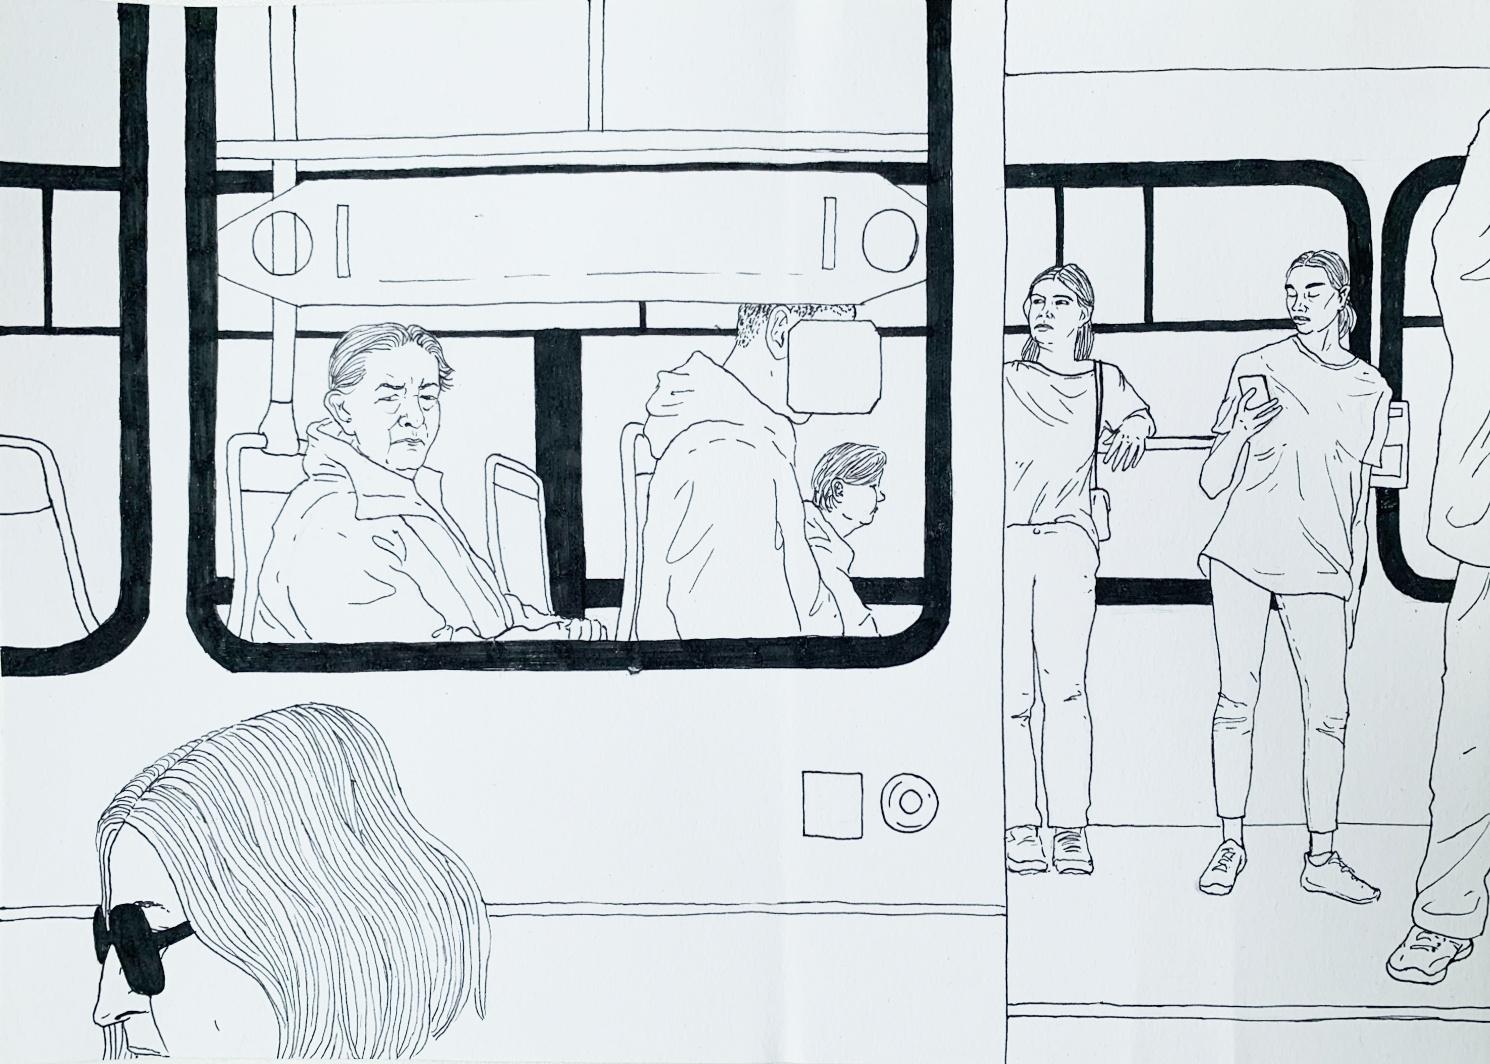 Anna Wardega Figurative Art - Streetcar - Contemporary ink drawing, Young art, Minimalism, Social commentary